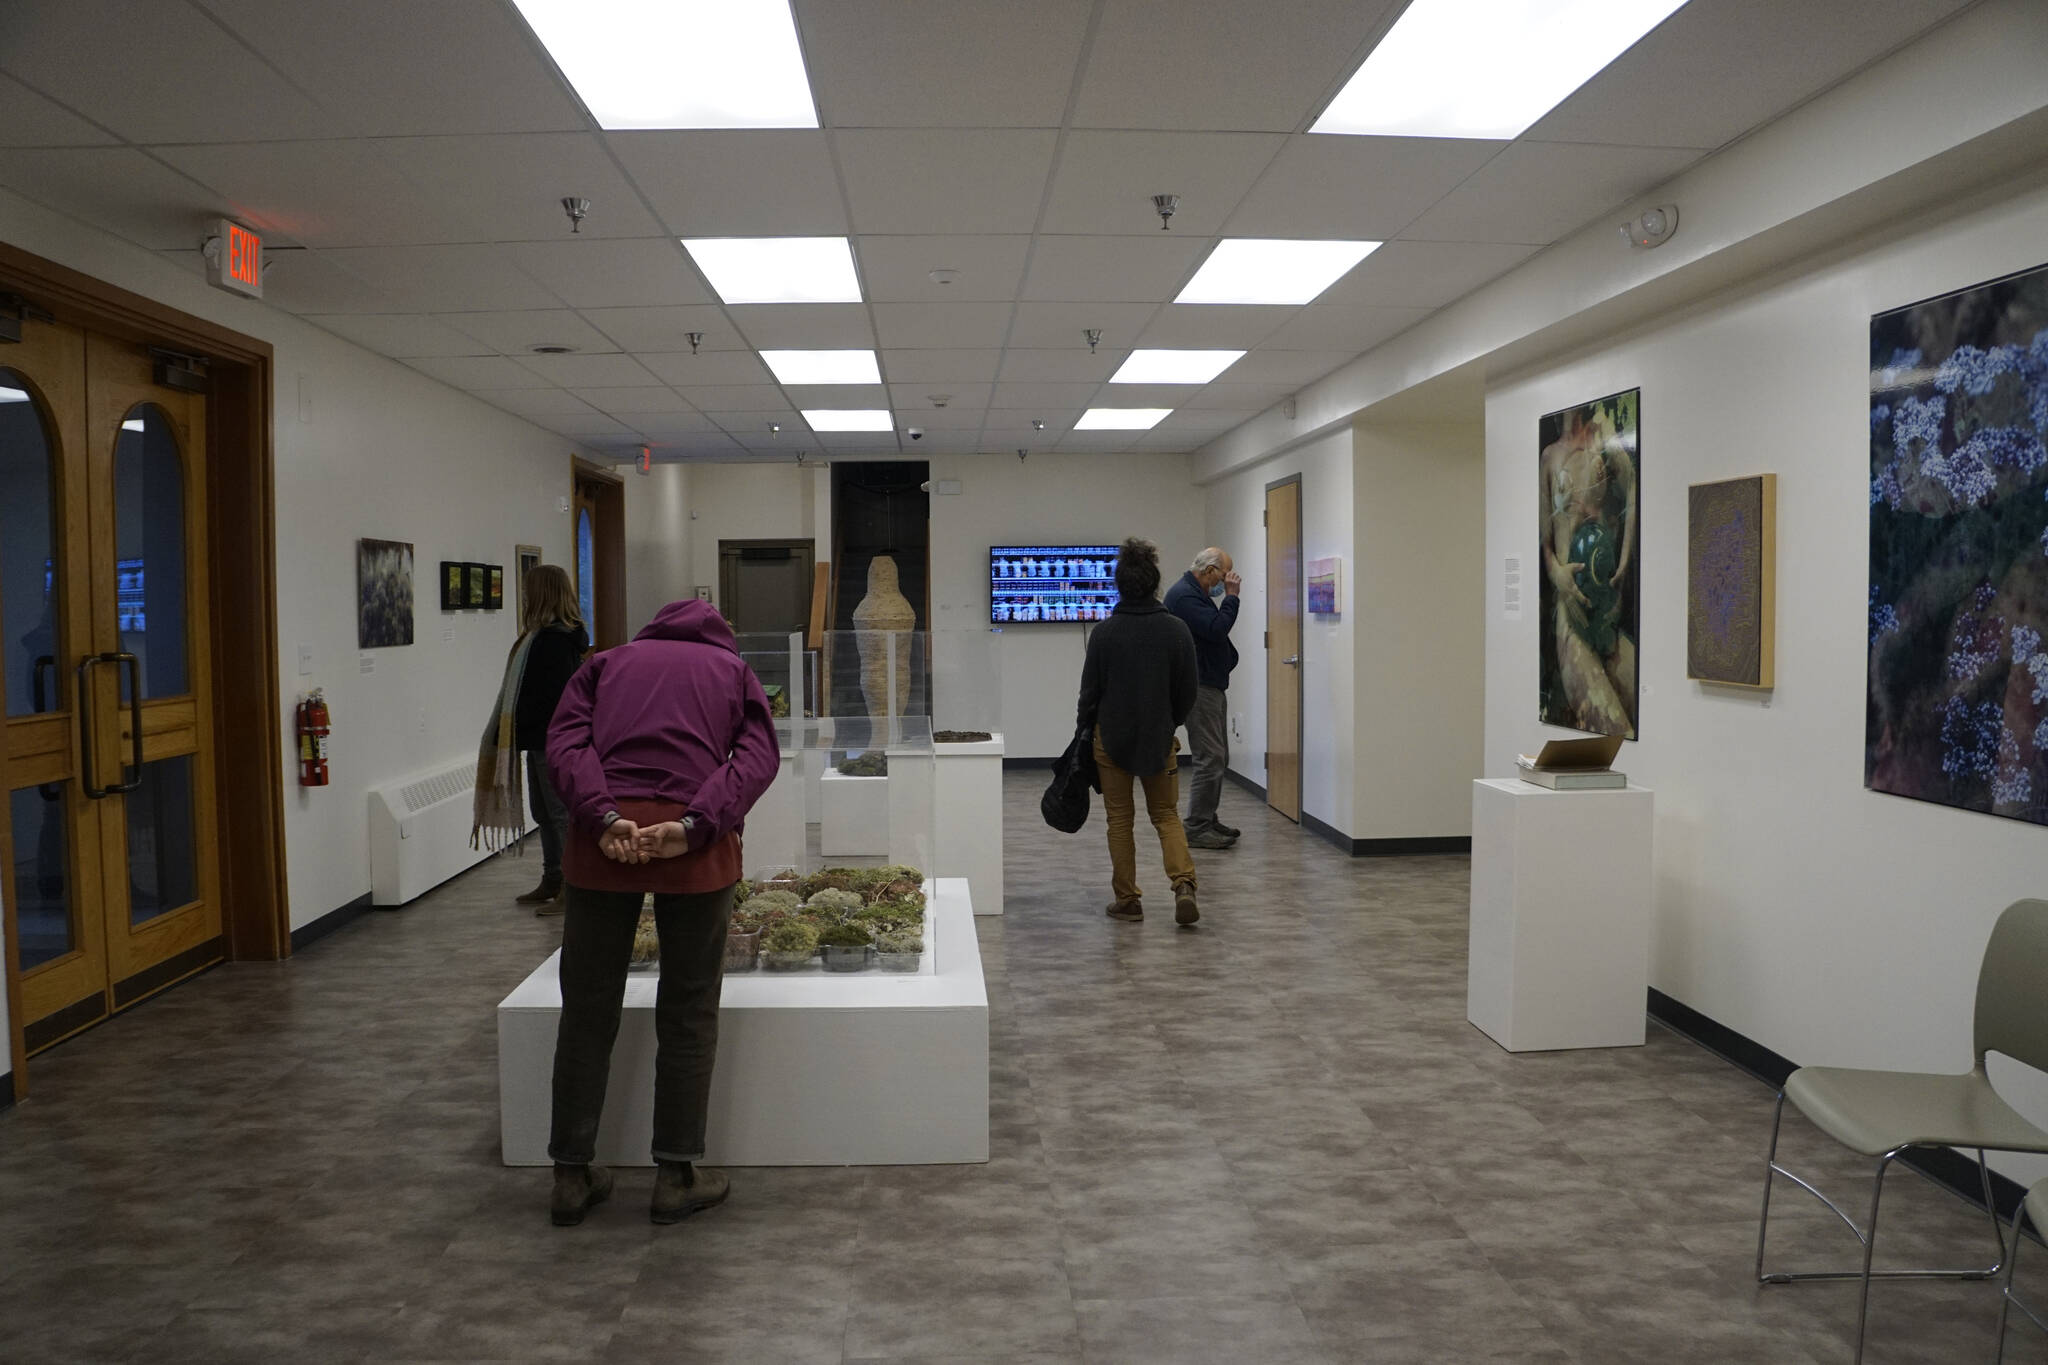 People visit the Homer Drawdown Peatland exhibit last Friday, Sept. 17, 2021, at a reception and talk at the Pratt Museum & Park in Homer, Alaska. (Photo by Michael Armstrong/Homer News)